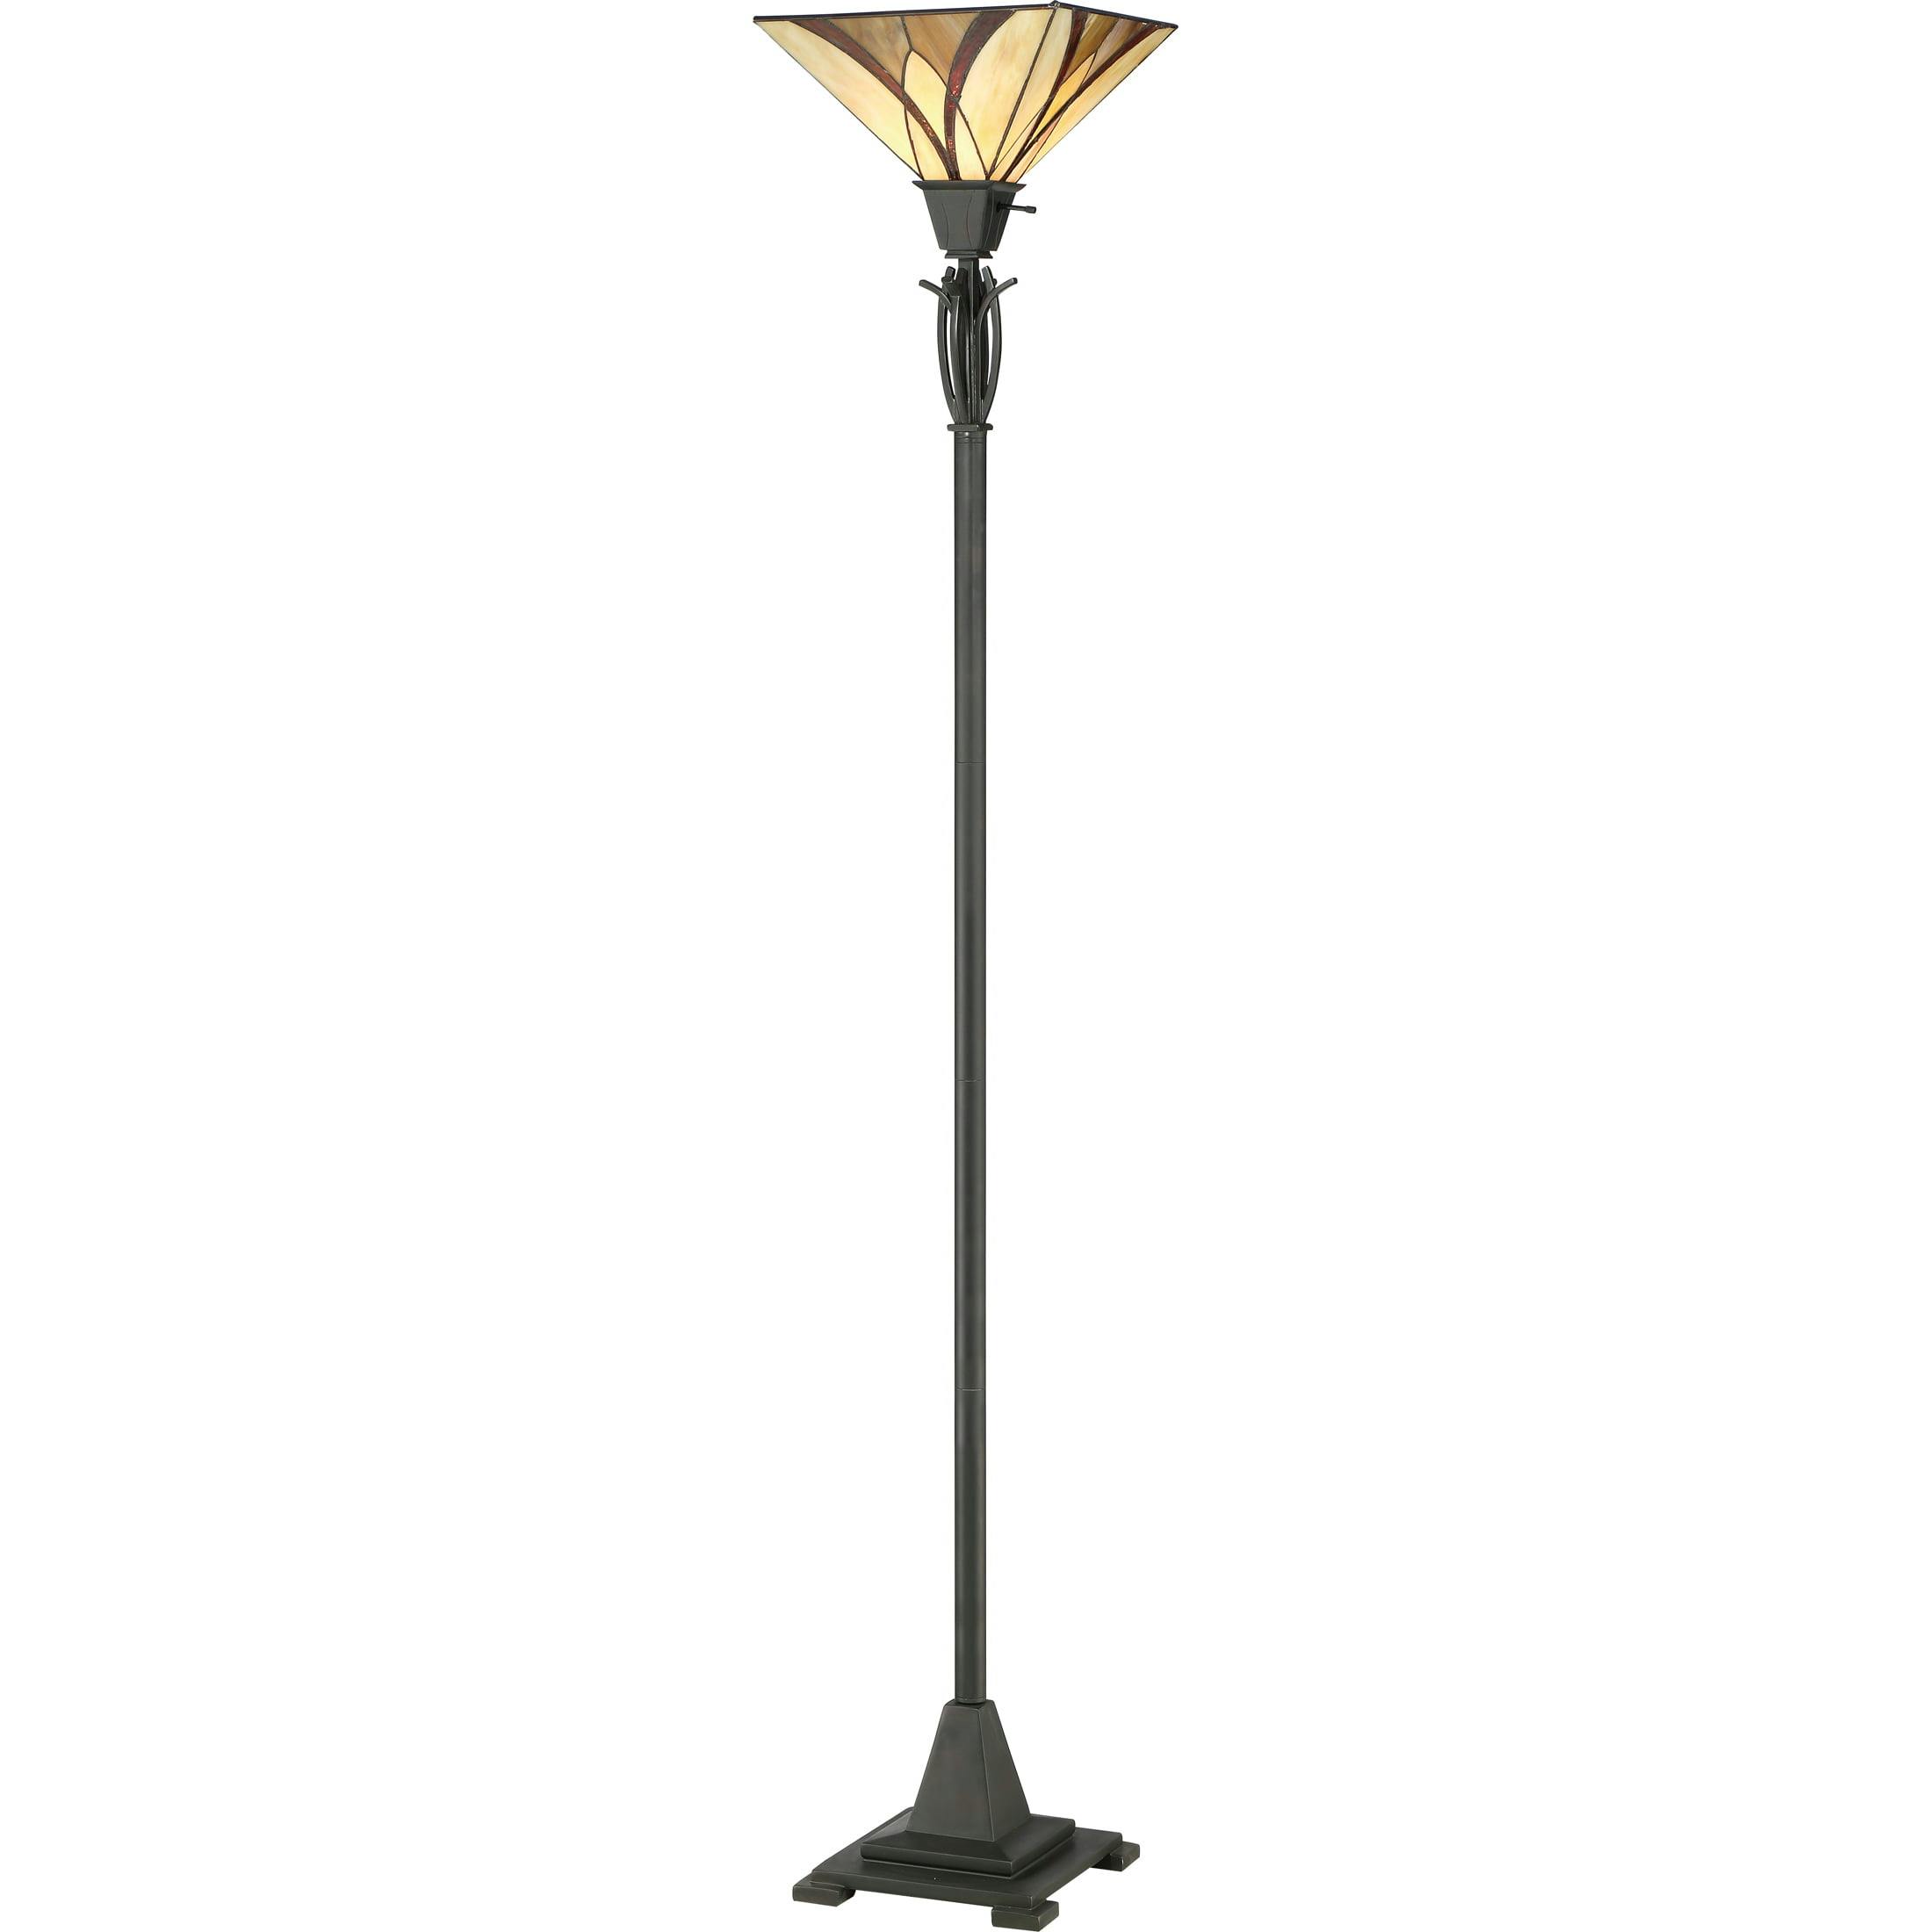 Asheville 70.5" Bronze Torchiere Floor Lamp with Tiffany Glass Shade